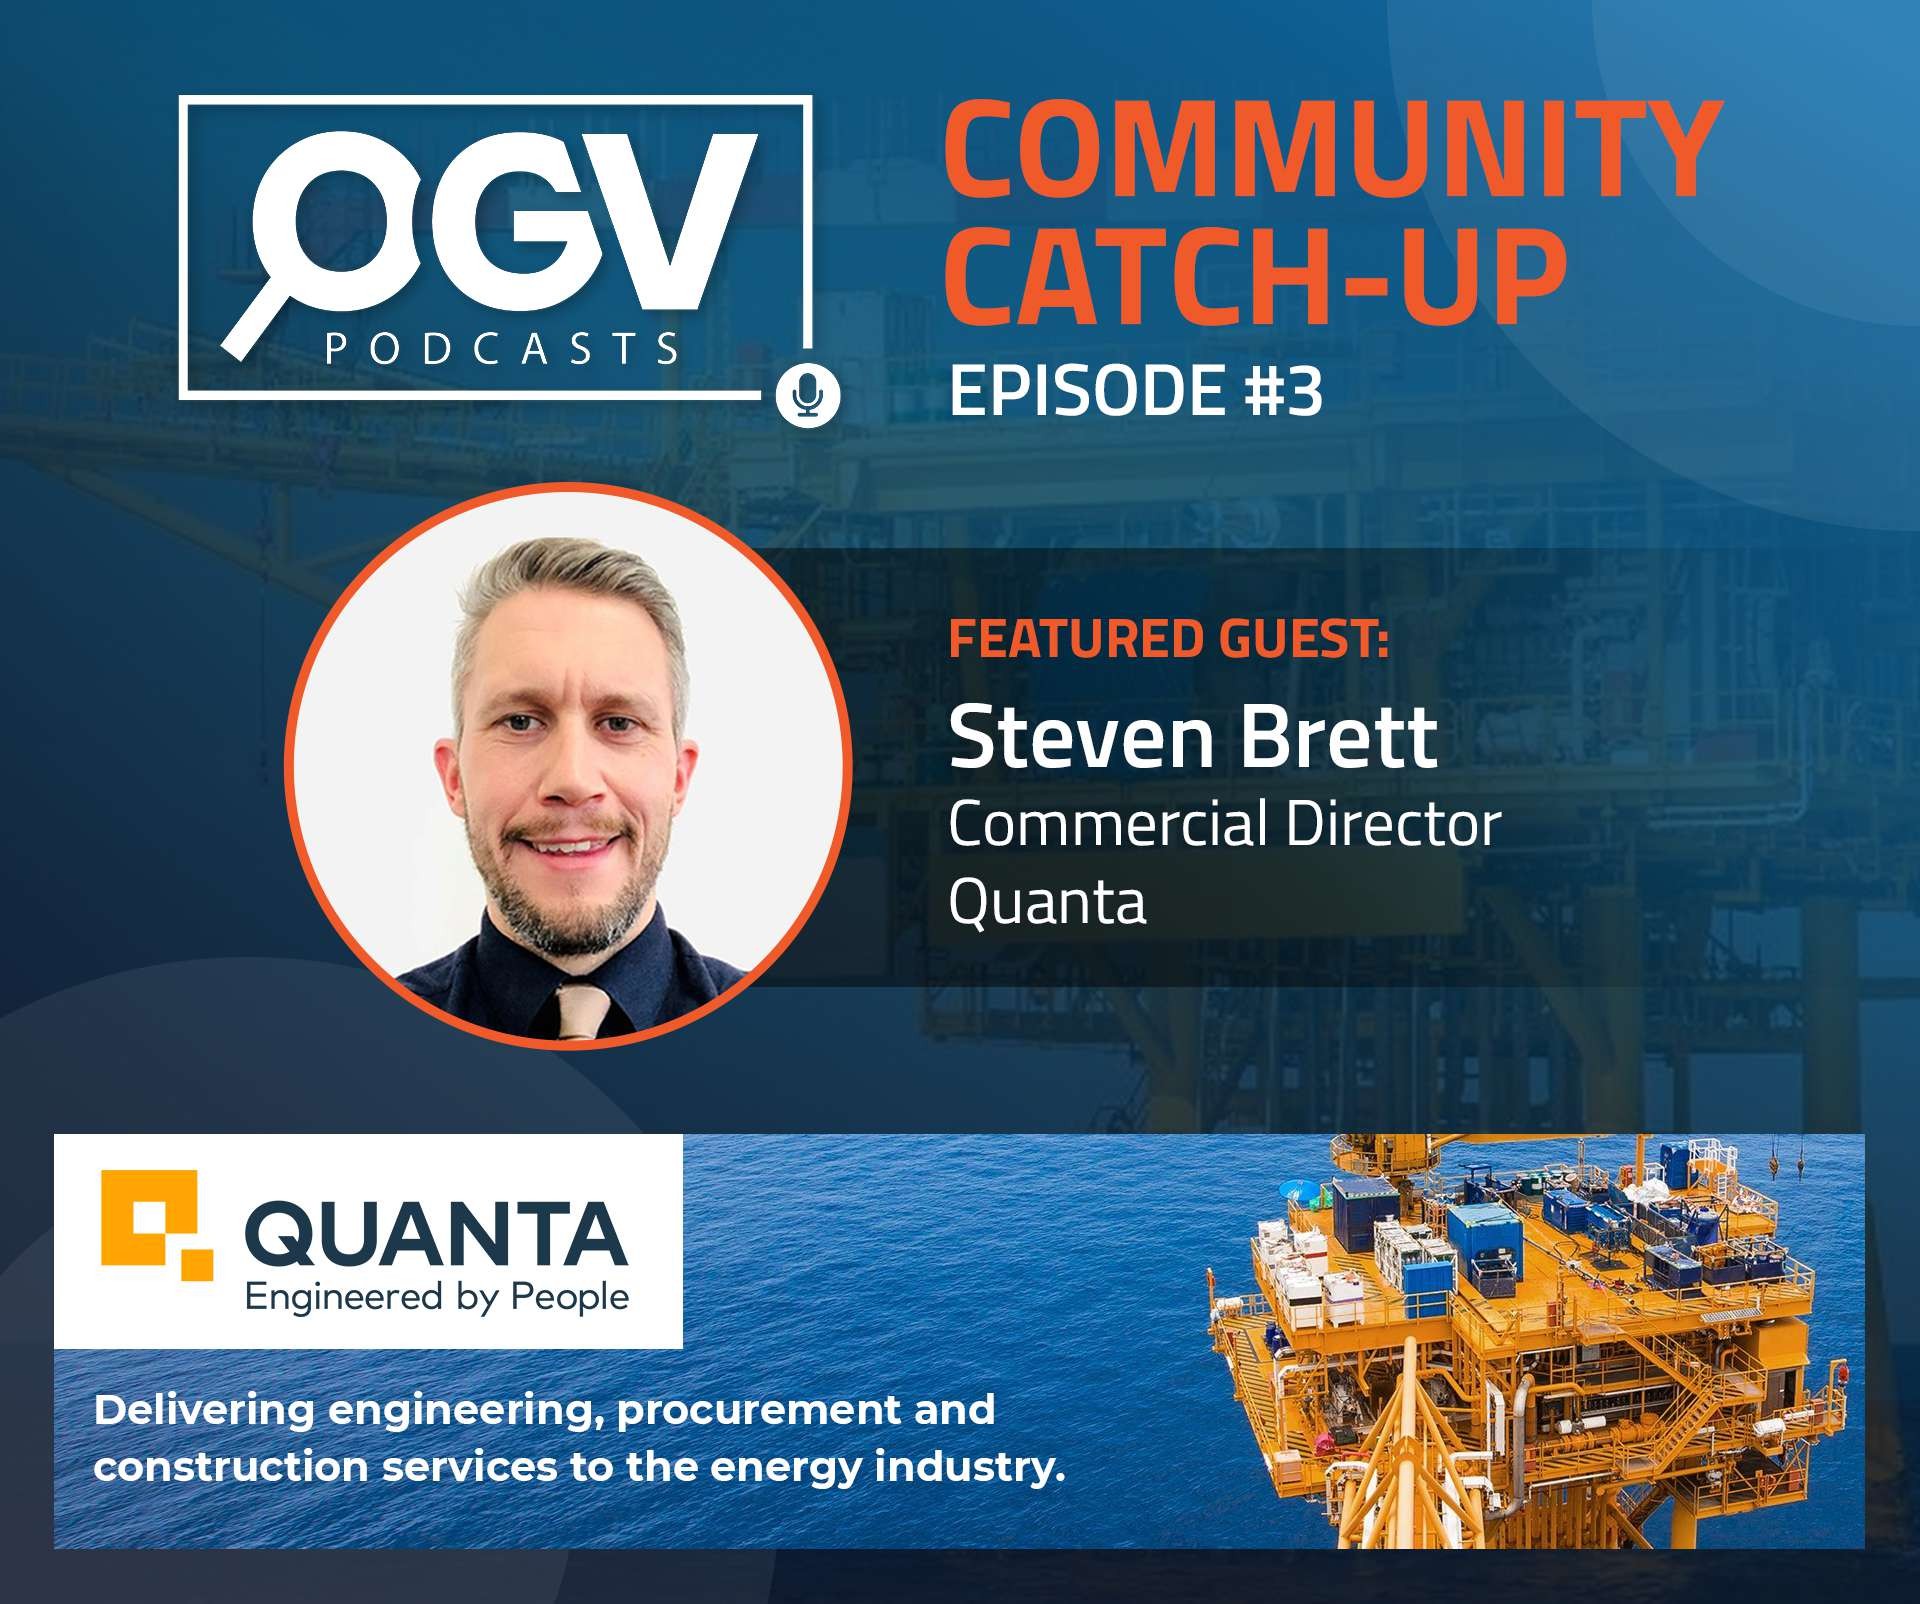 OGV Community Catch-up with Steven Brett from Quanta